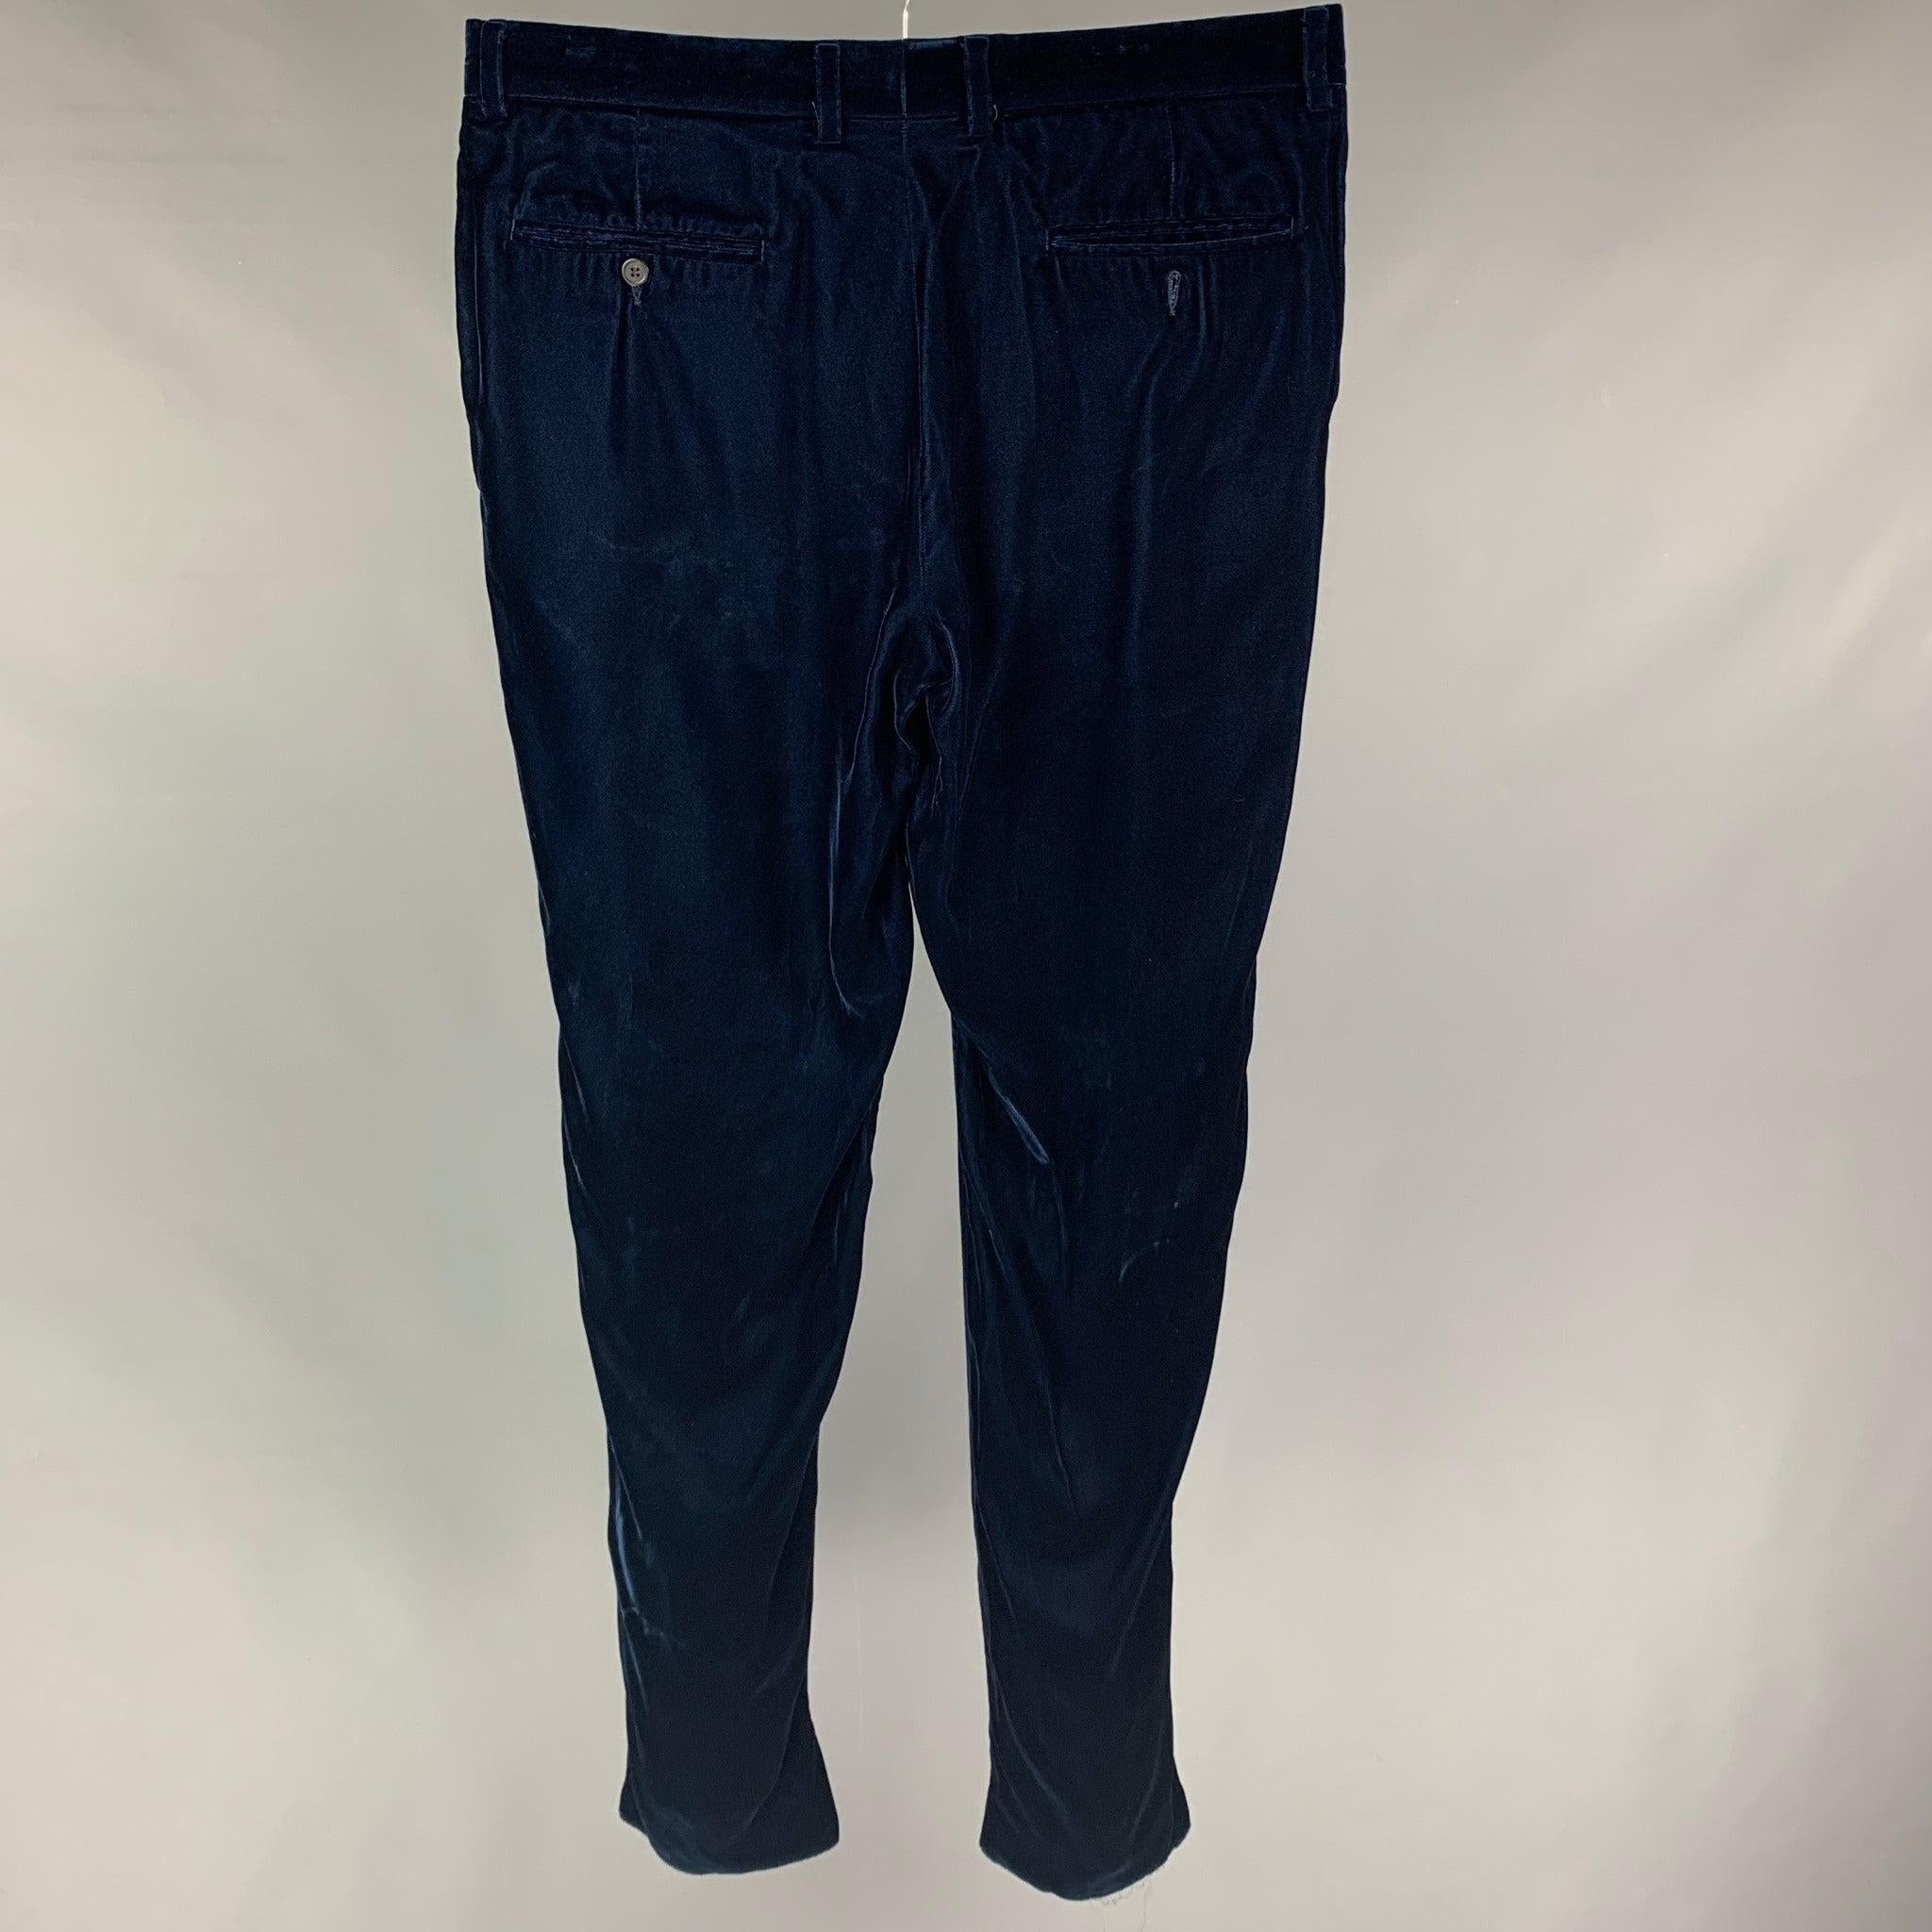 EMPORIO ARMANI dress pants comes in a navy velvet acetate blend featuring a slim fit, front tab, and a zip fly closure.
Very Good
Pre-Owned Condition. 

Marked:  52 

Measurements: 
 Waist: 36 inches Rise:
10.5 inches Inseam: 34 inches Leg Opening: